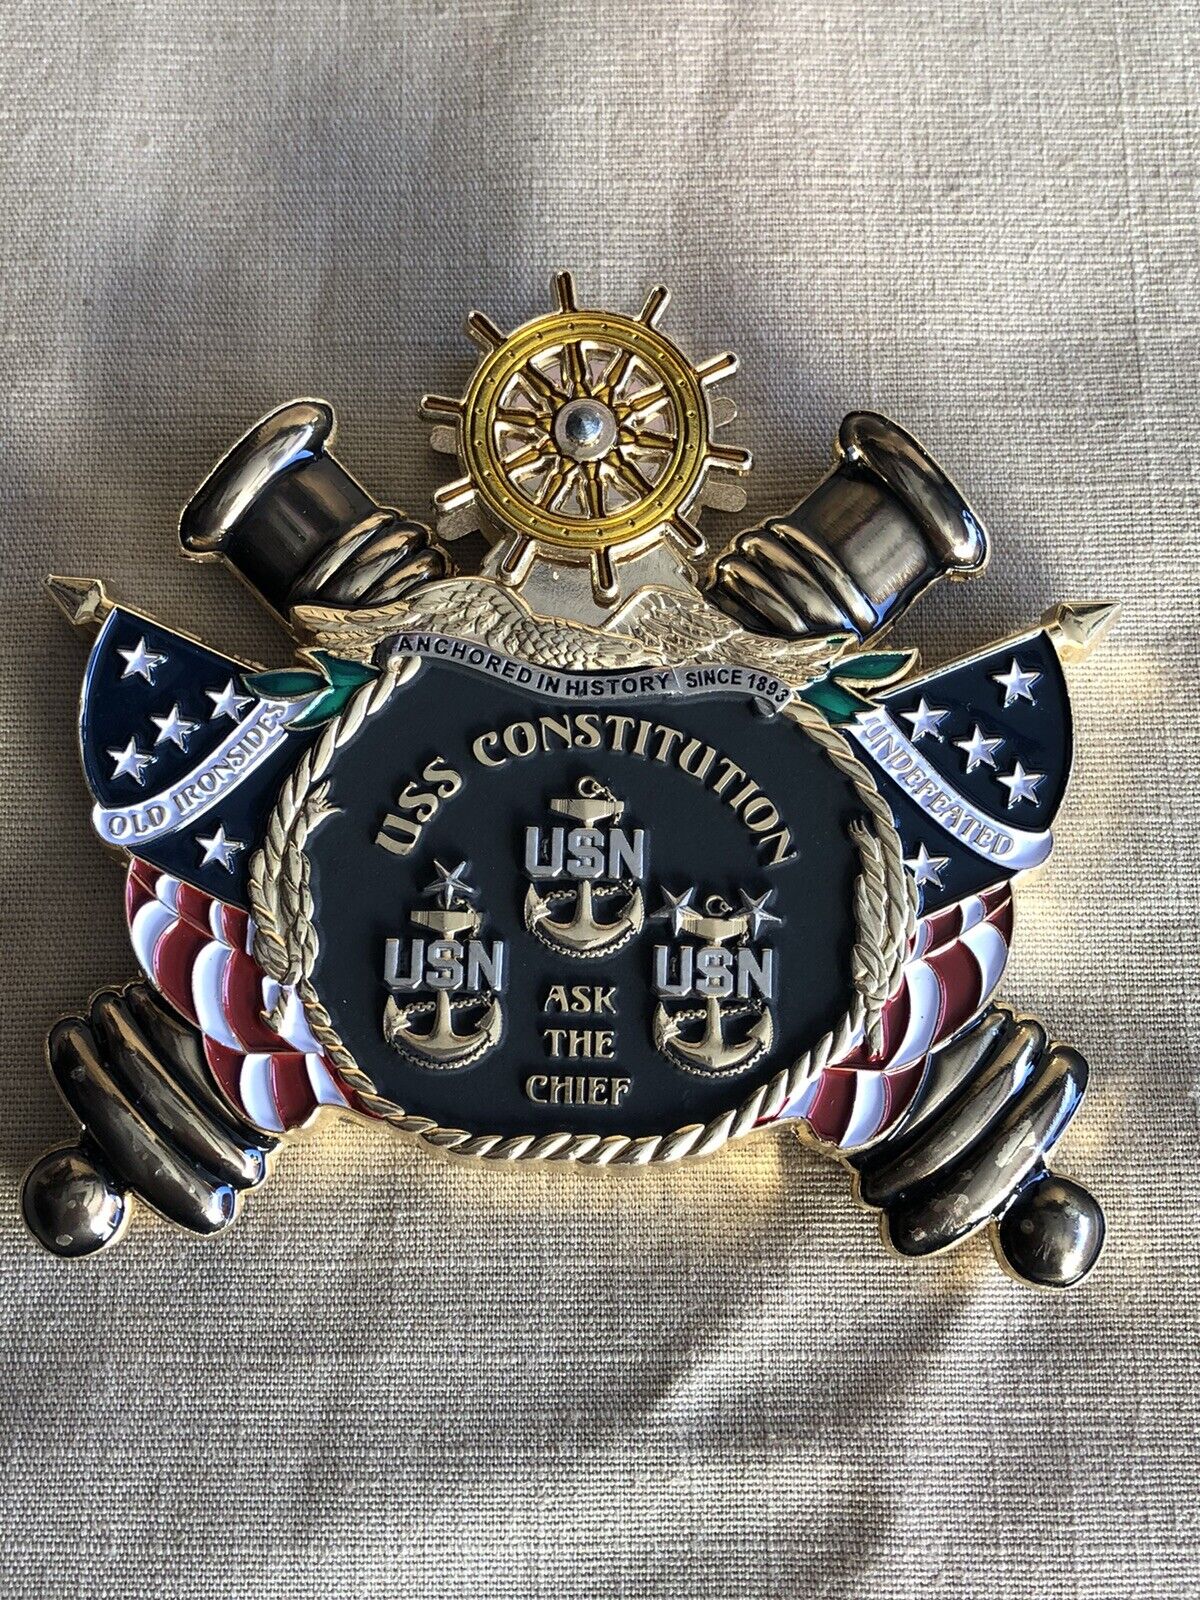 USS Constitution “Ask The Chief” CPO Spinner Challenge Coin